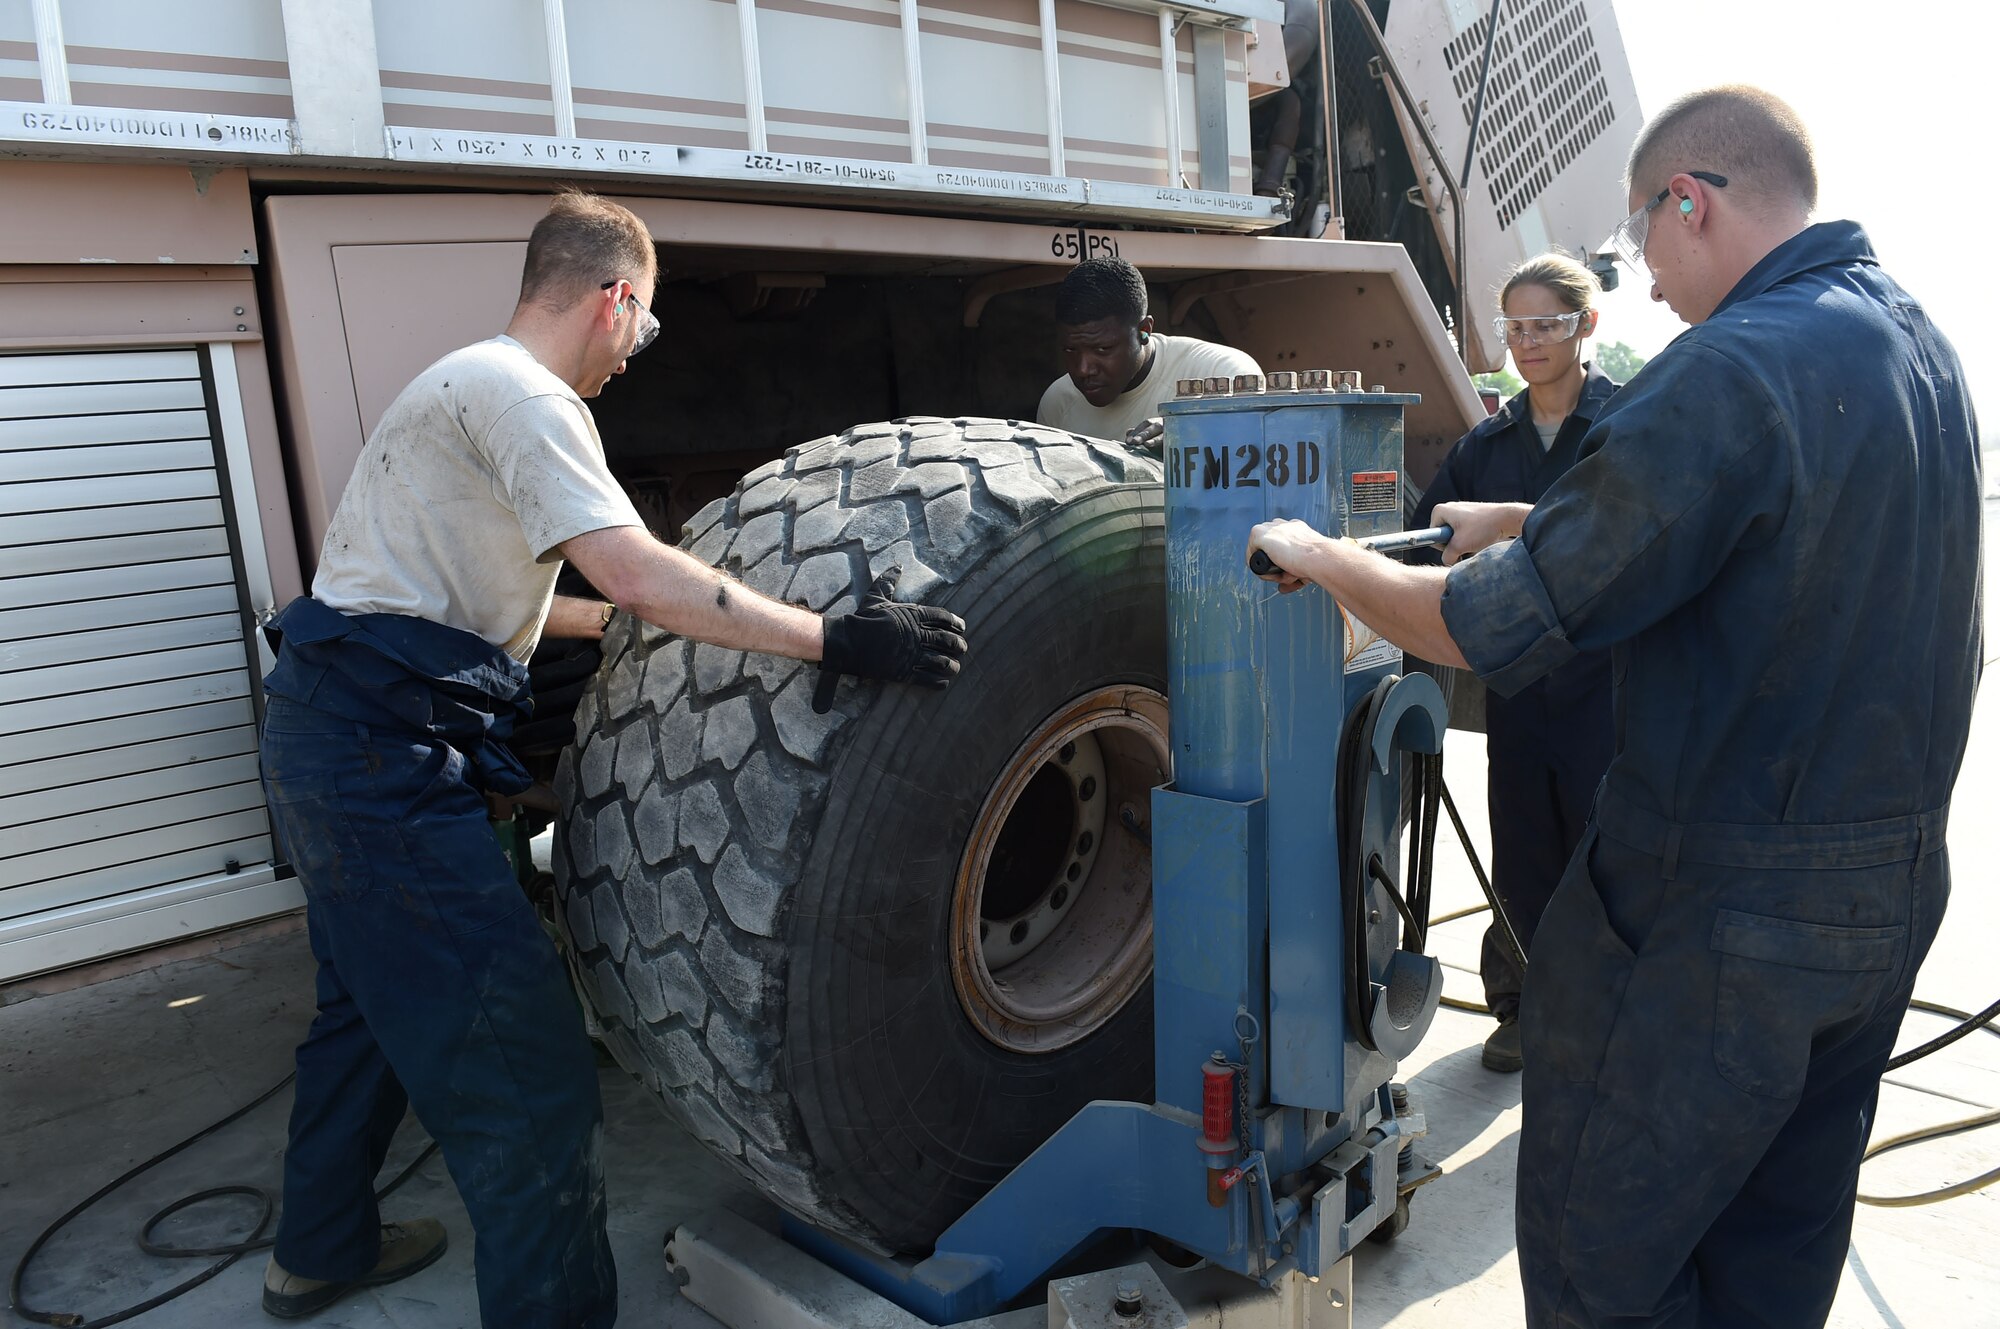 Col. Kevin Eastland, 380th Air Expeditionary Wing vice commander, works with Senior Airman Alex, 380th Fire and Refueler Maintenance vehicle maintainer, to pull a tire from a fire truck onto a lift system operated by Staff Sgt. Alex, 380th FARM vehicle maintainer, at an undisclosed location in Southwest Asia, November 16, 2016. FARM vehicle maintainers are responsible for ensuring that all fire and fuel trucks are operational and mission ready. (U.S. Air Force photo by Tech. Sgt. Christopher Carwile) 